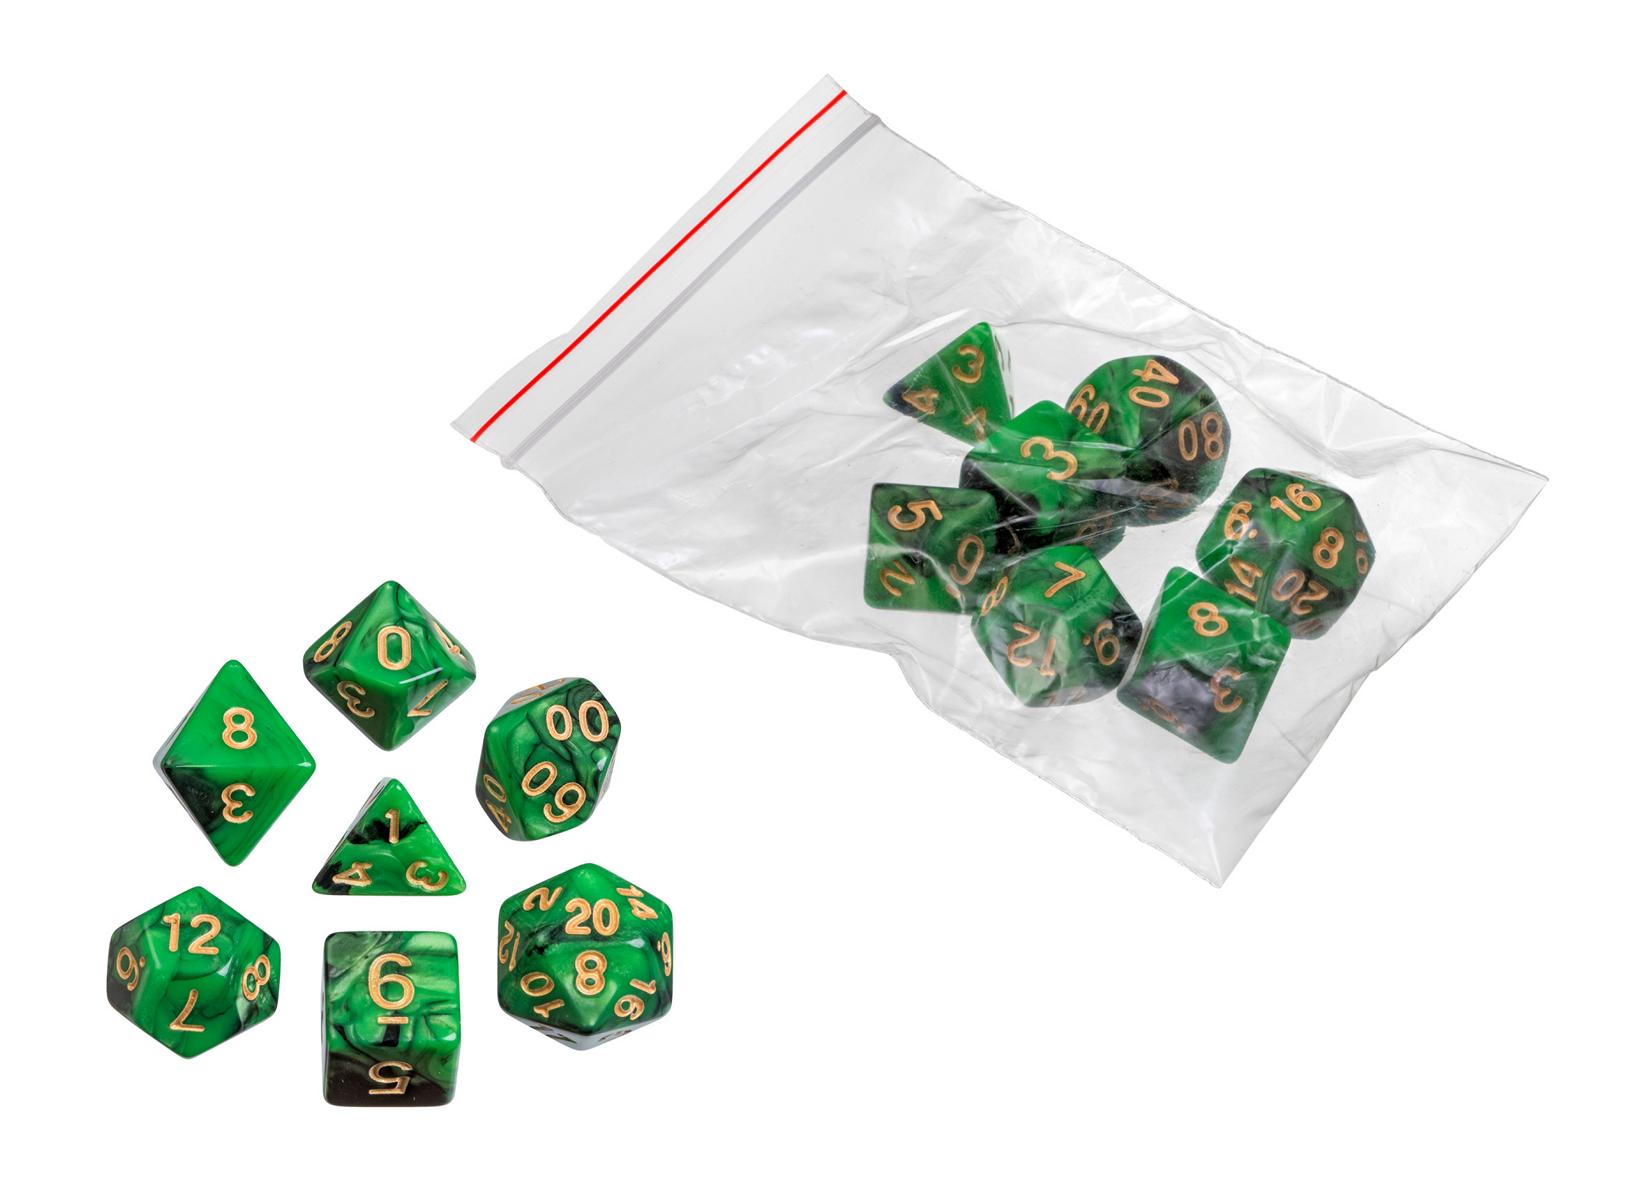 Dice, oblivion, green, 7 pieces in polybag